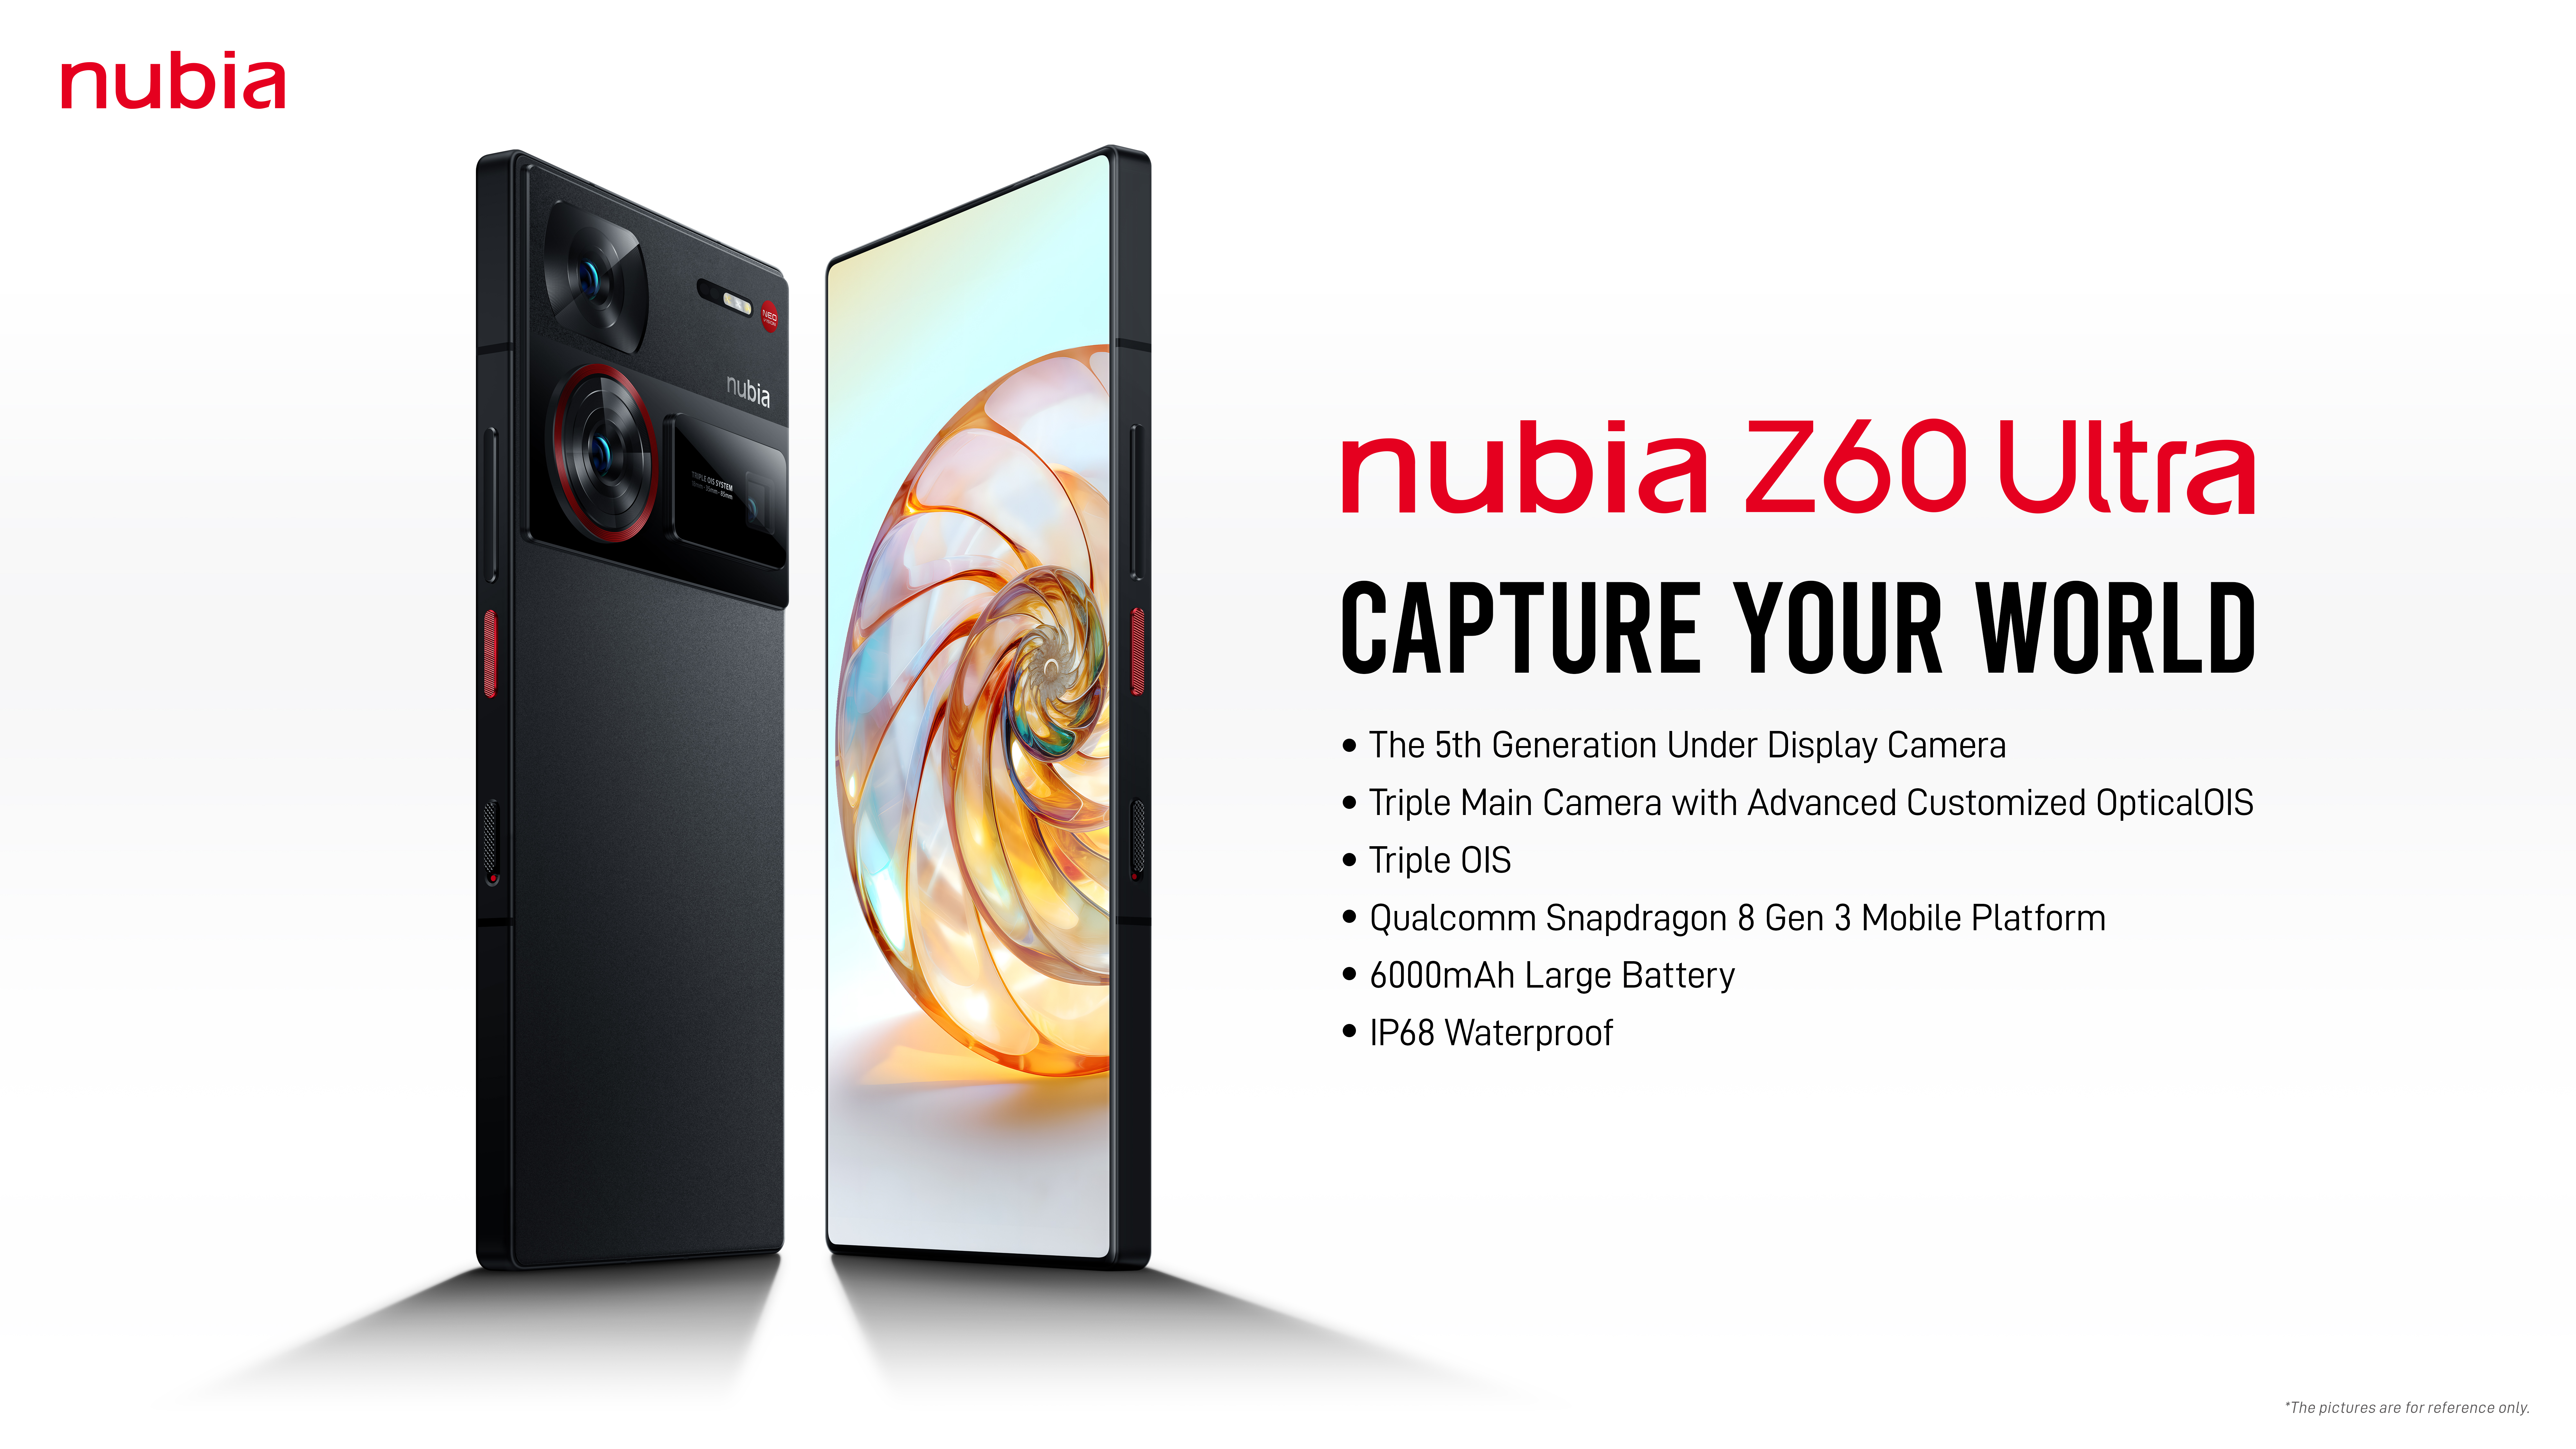 ZTE Relaunches nubia Z60 Ultra With RM3,799 Price Tag